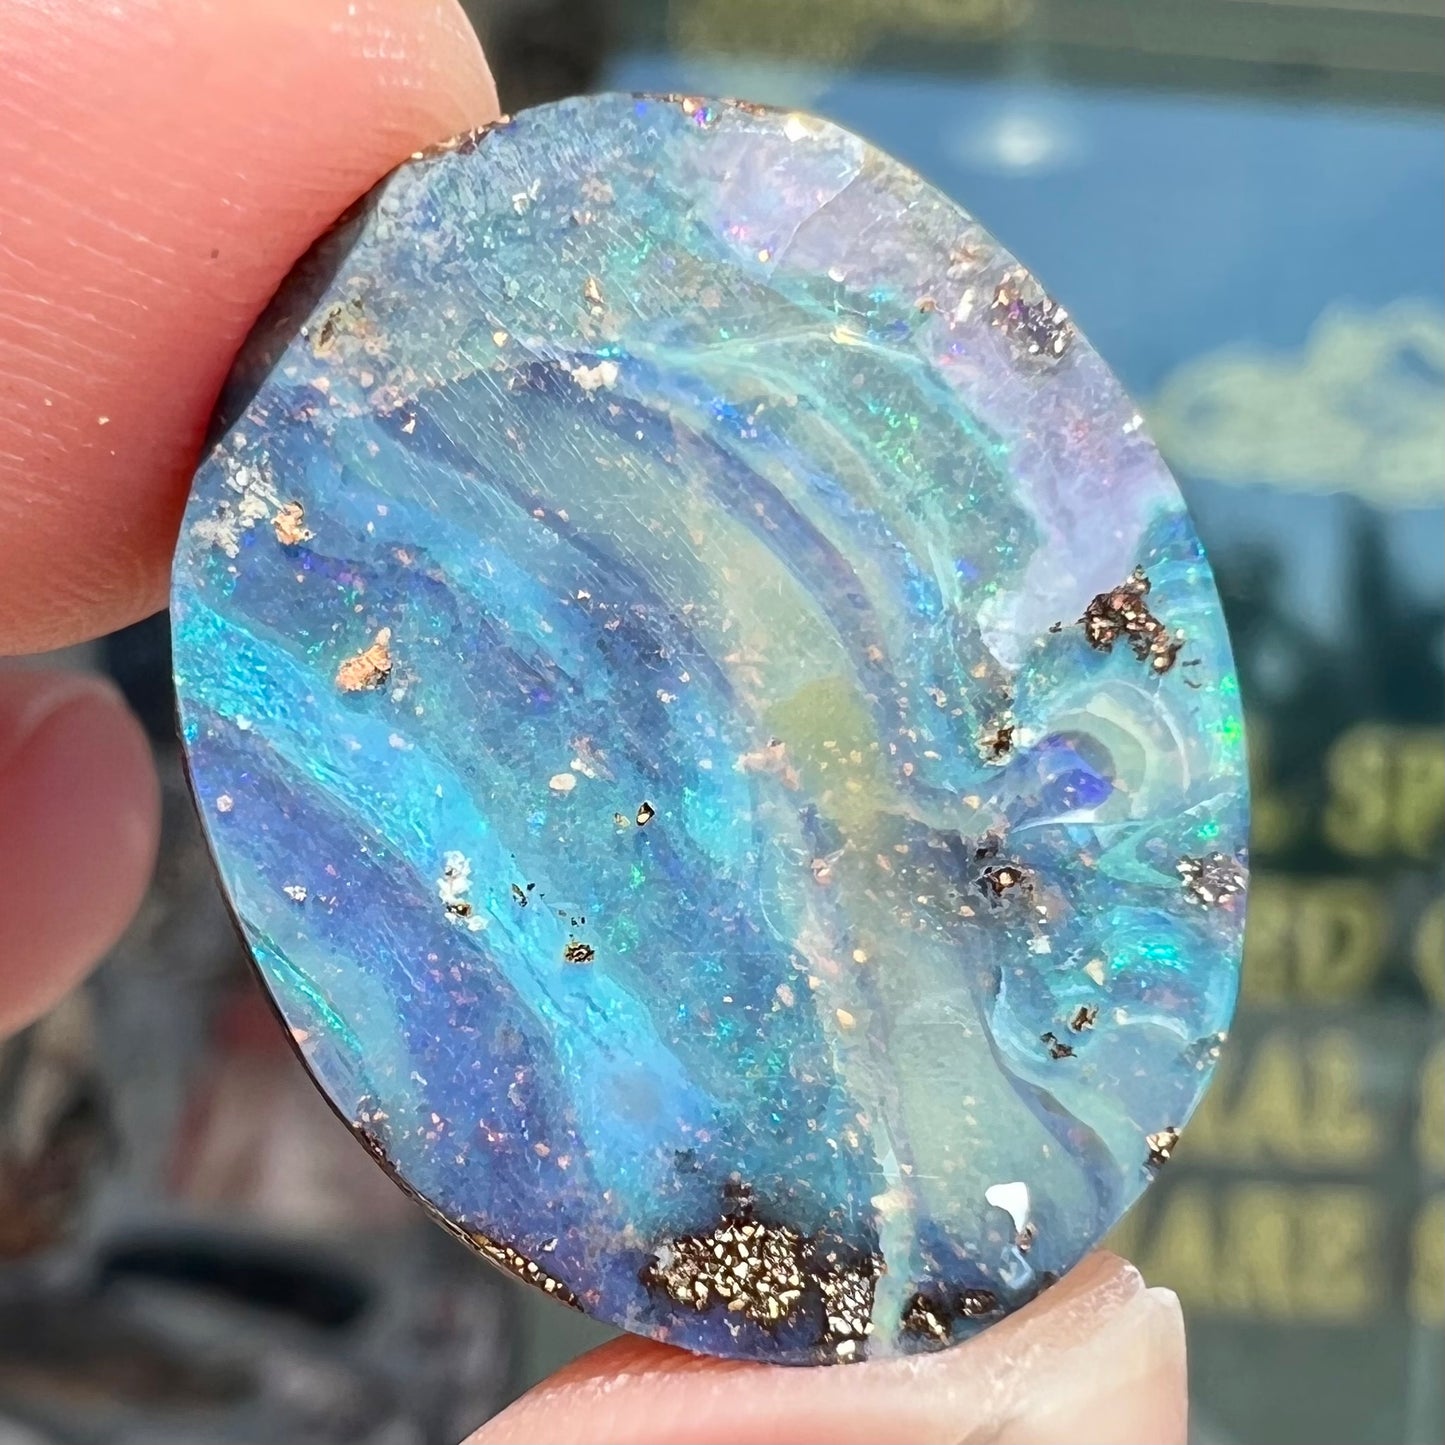 A loose, oval cabochon cut boulder opal stone from Queensland, Australia.  The stone is predominantly blue.